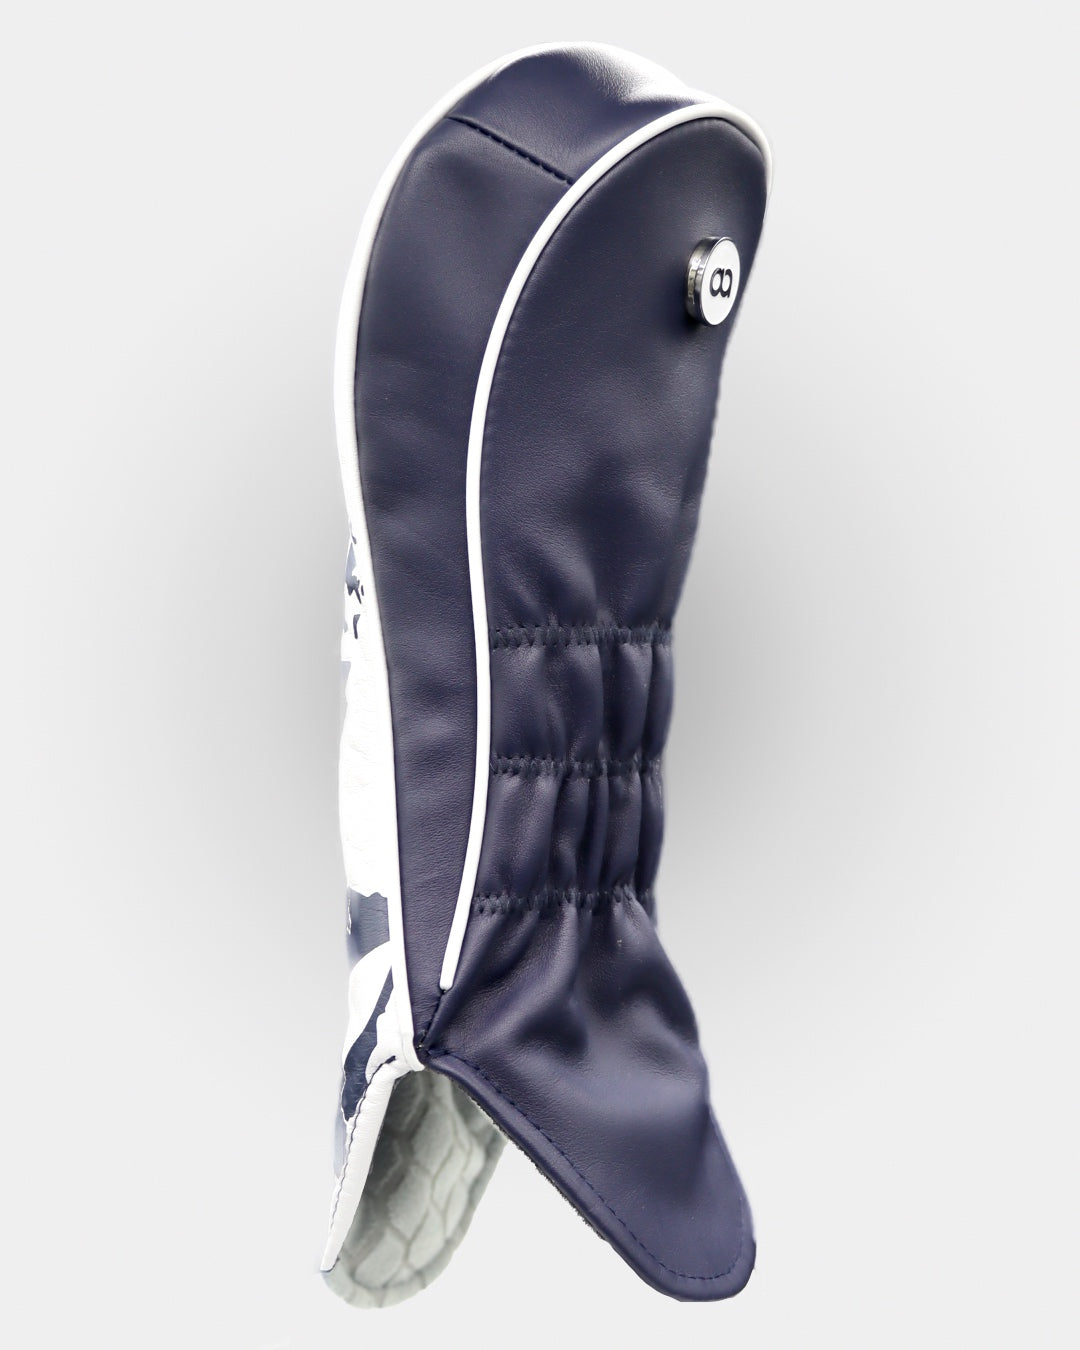 Scotland white and navy blue leather driver headcover by David Alexander